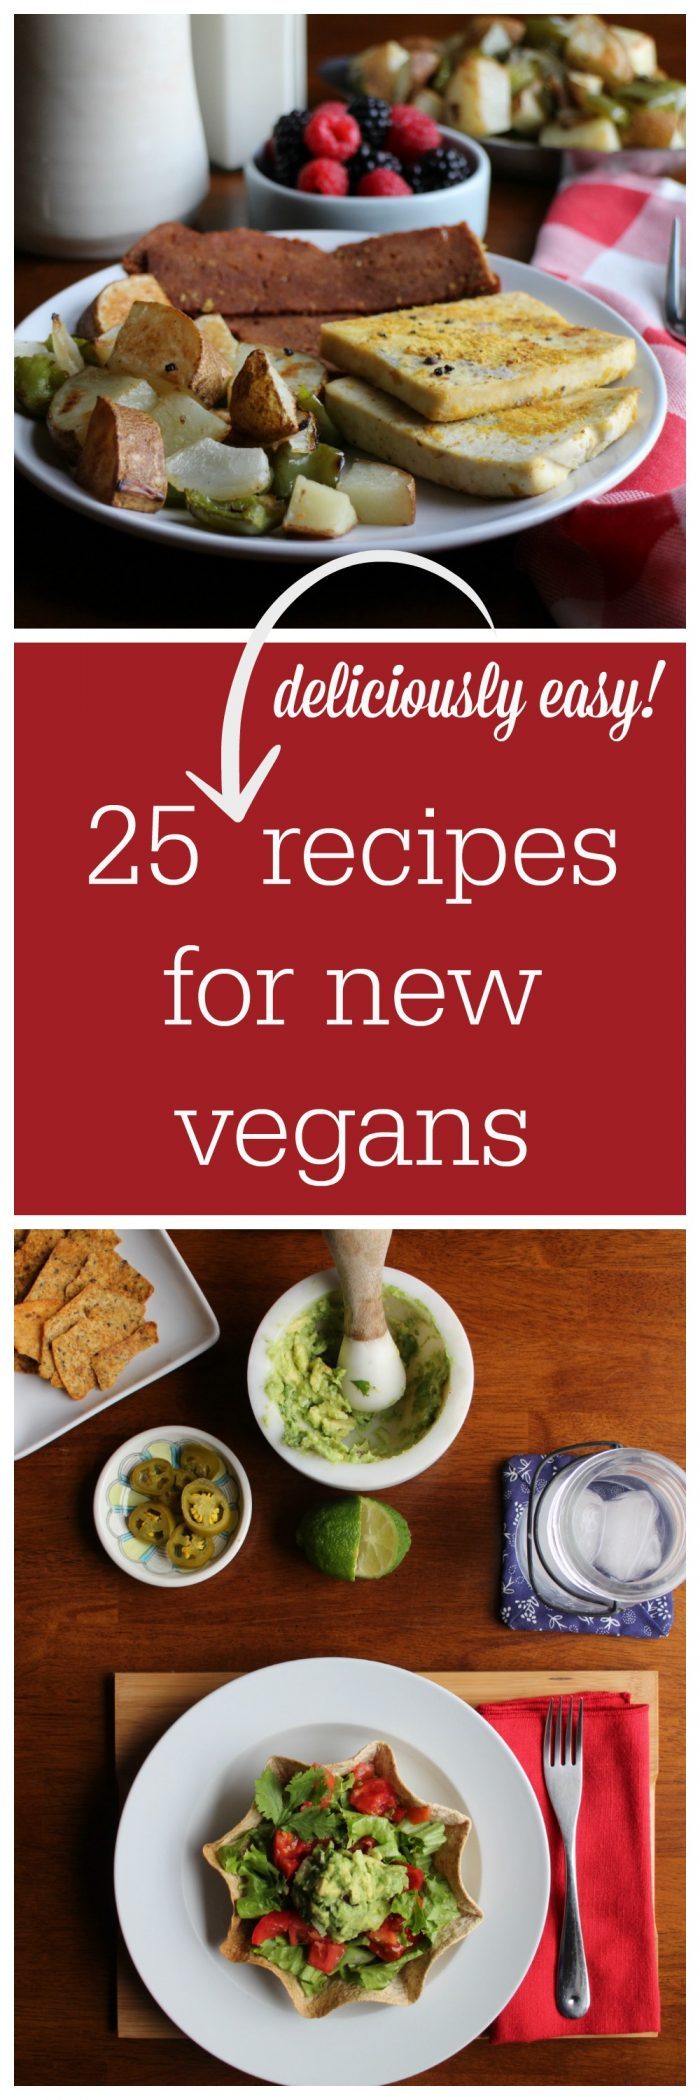 Is this the year you're going vegan? Here are 25 deliciously doable recipes to get you started. | cadryskitchen.com